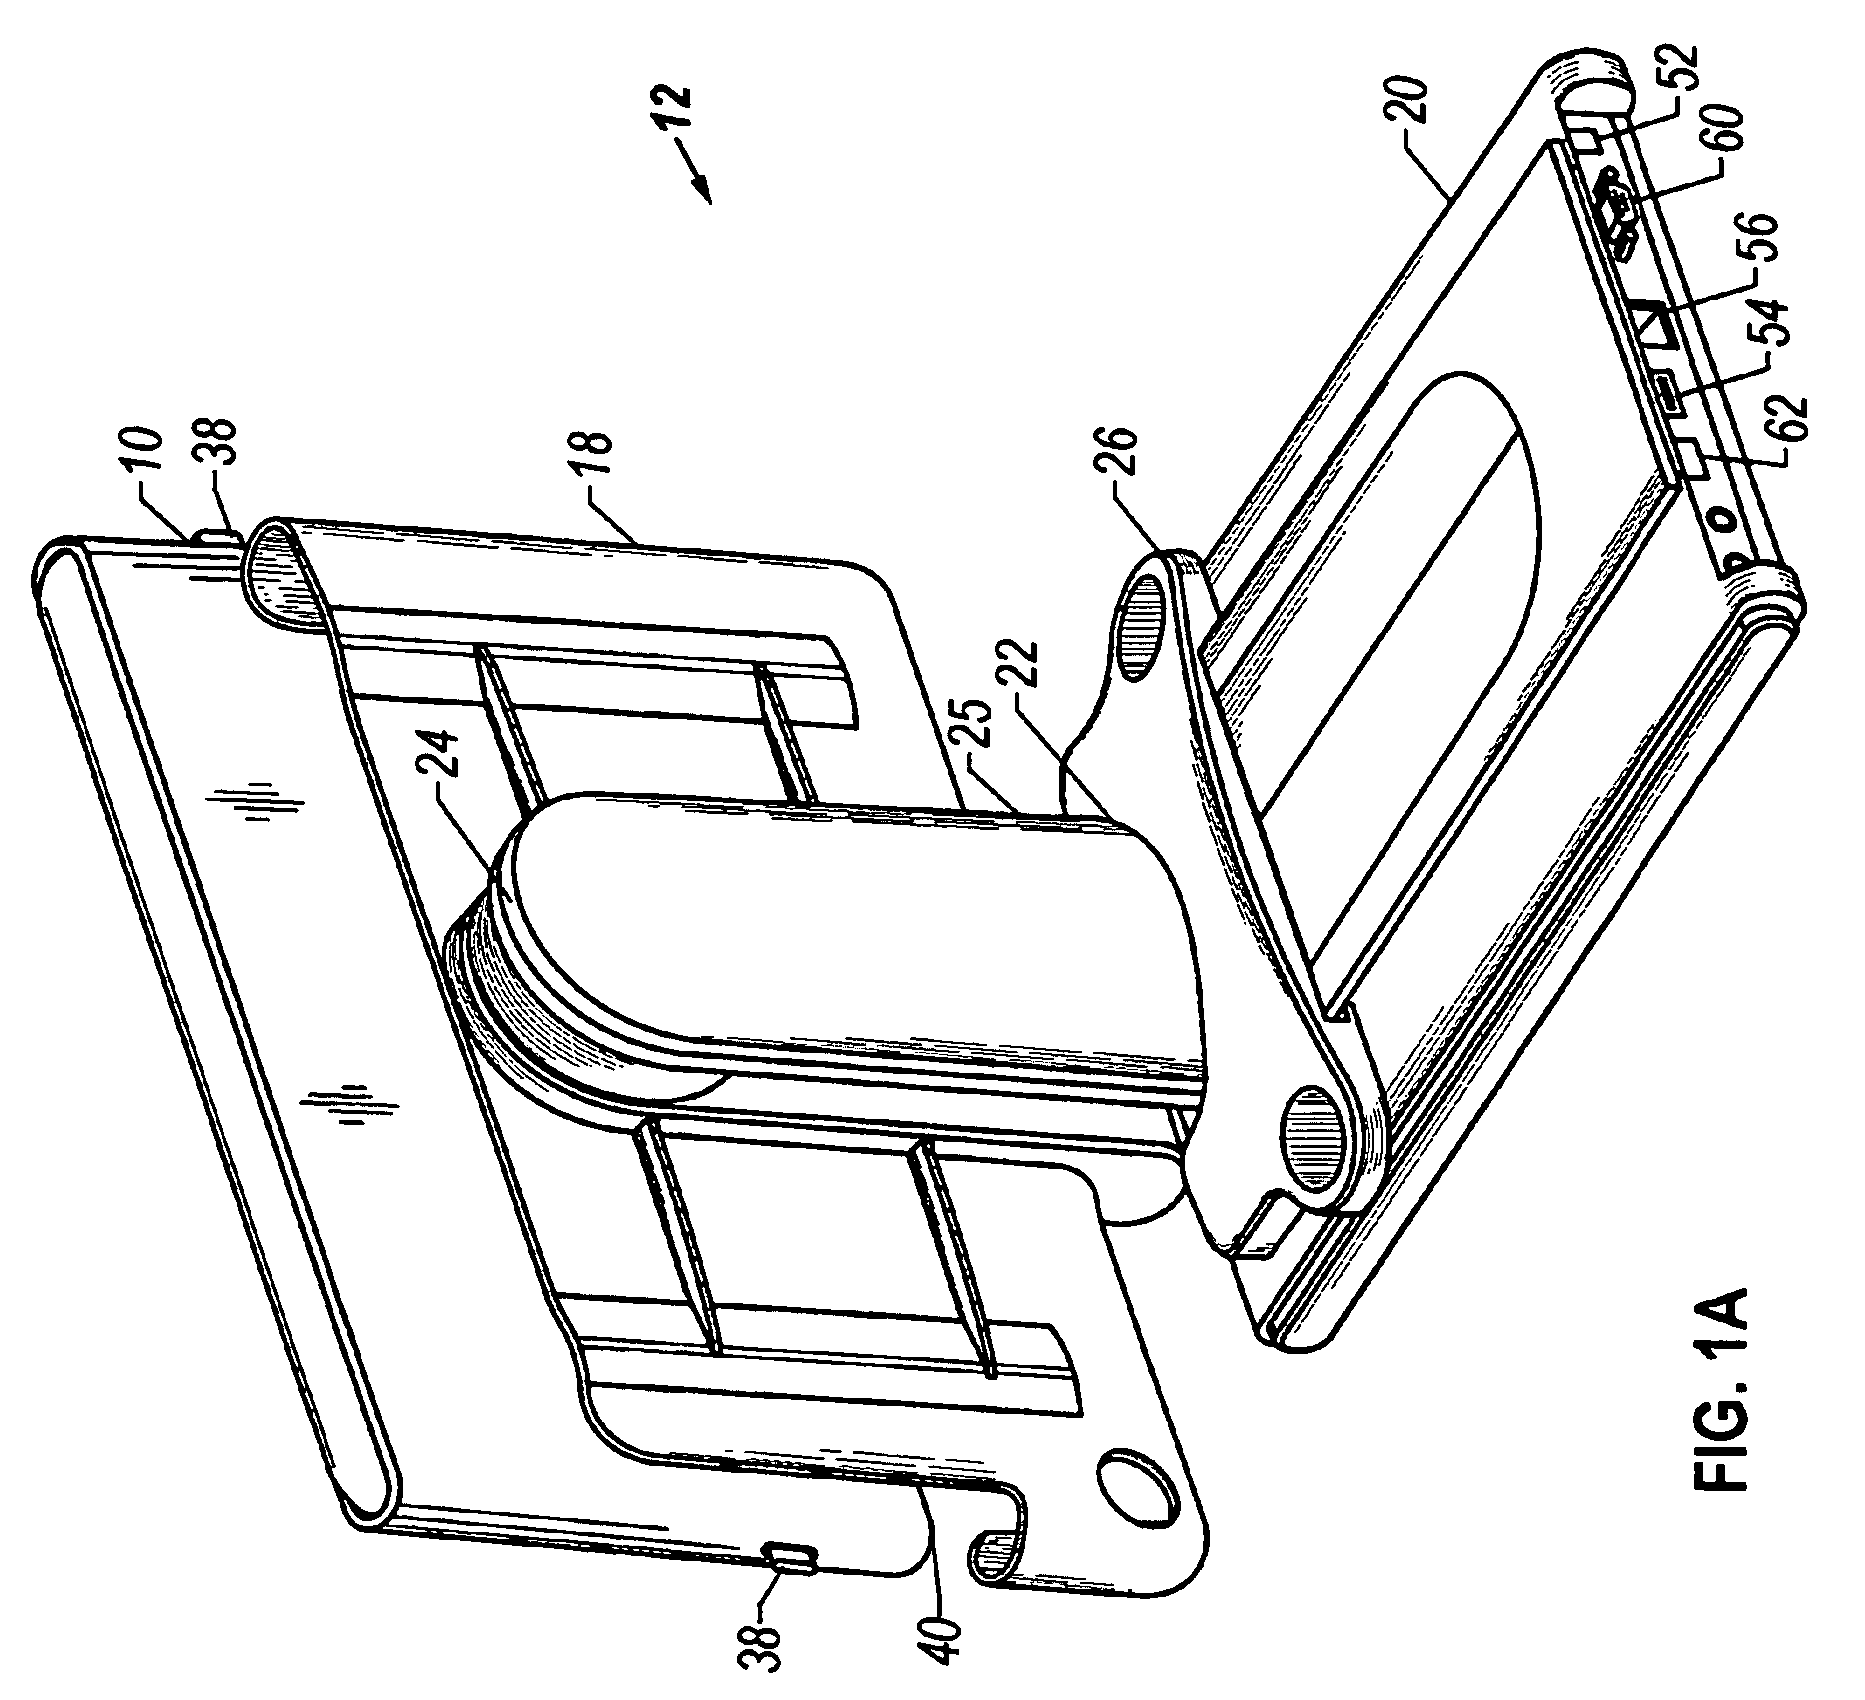 Ultra thin tablet computer battery and docking system